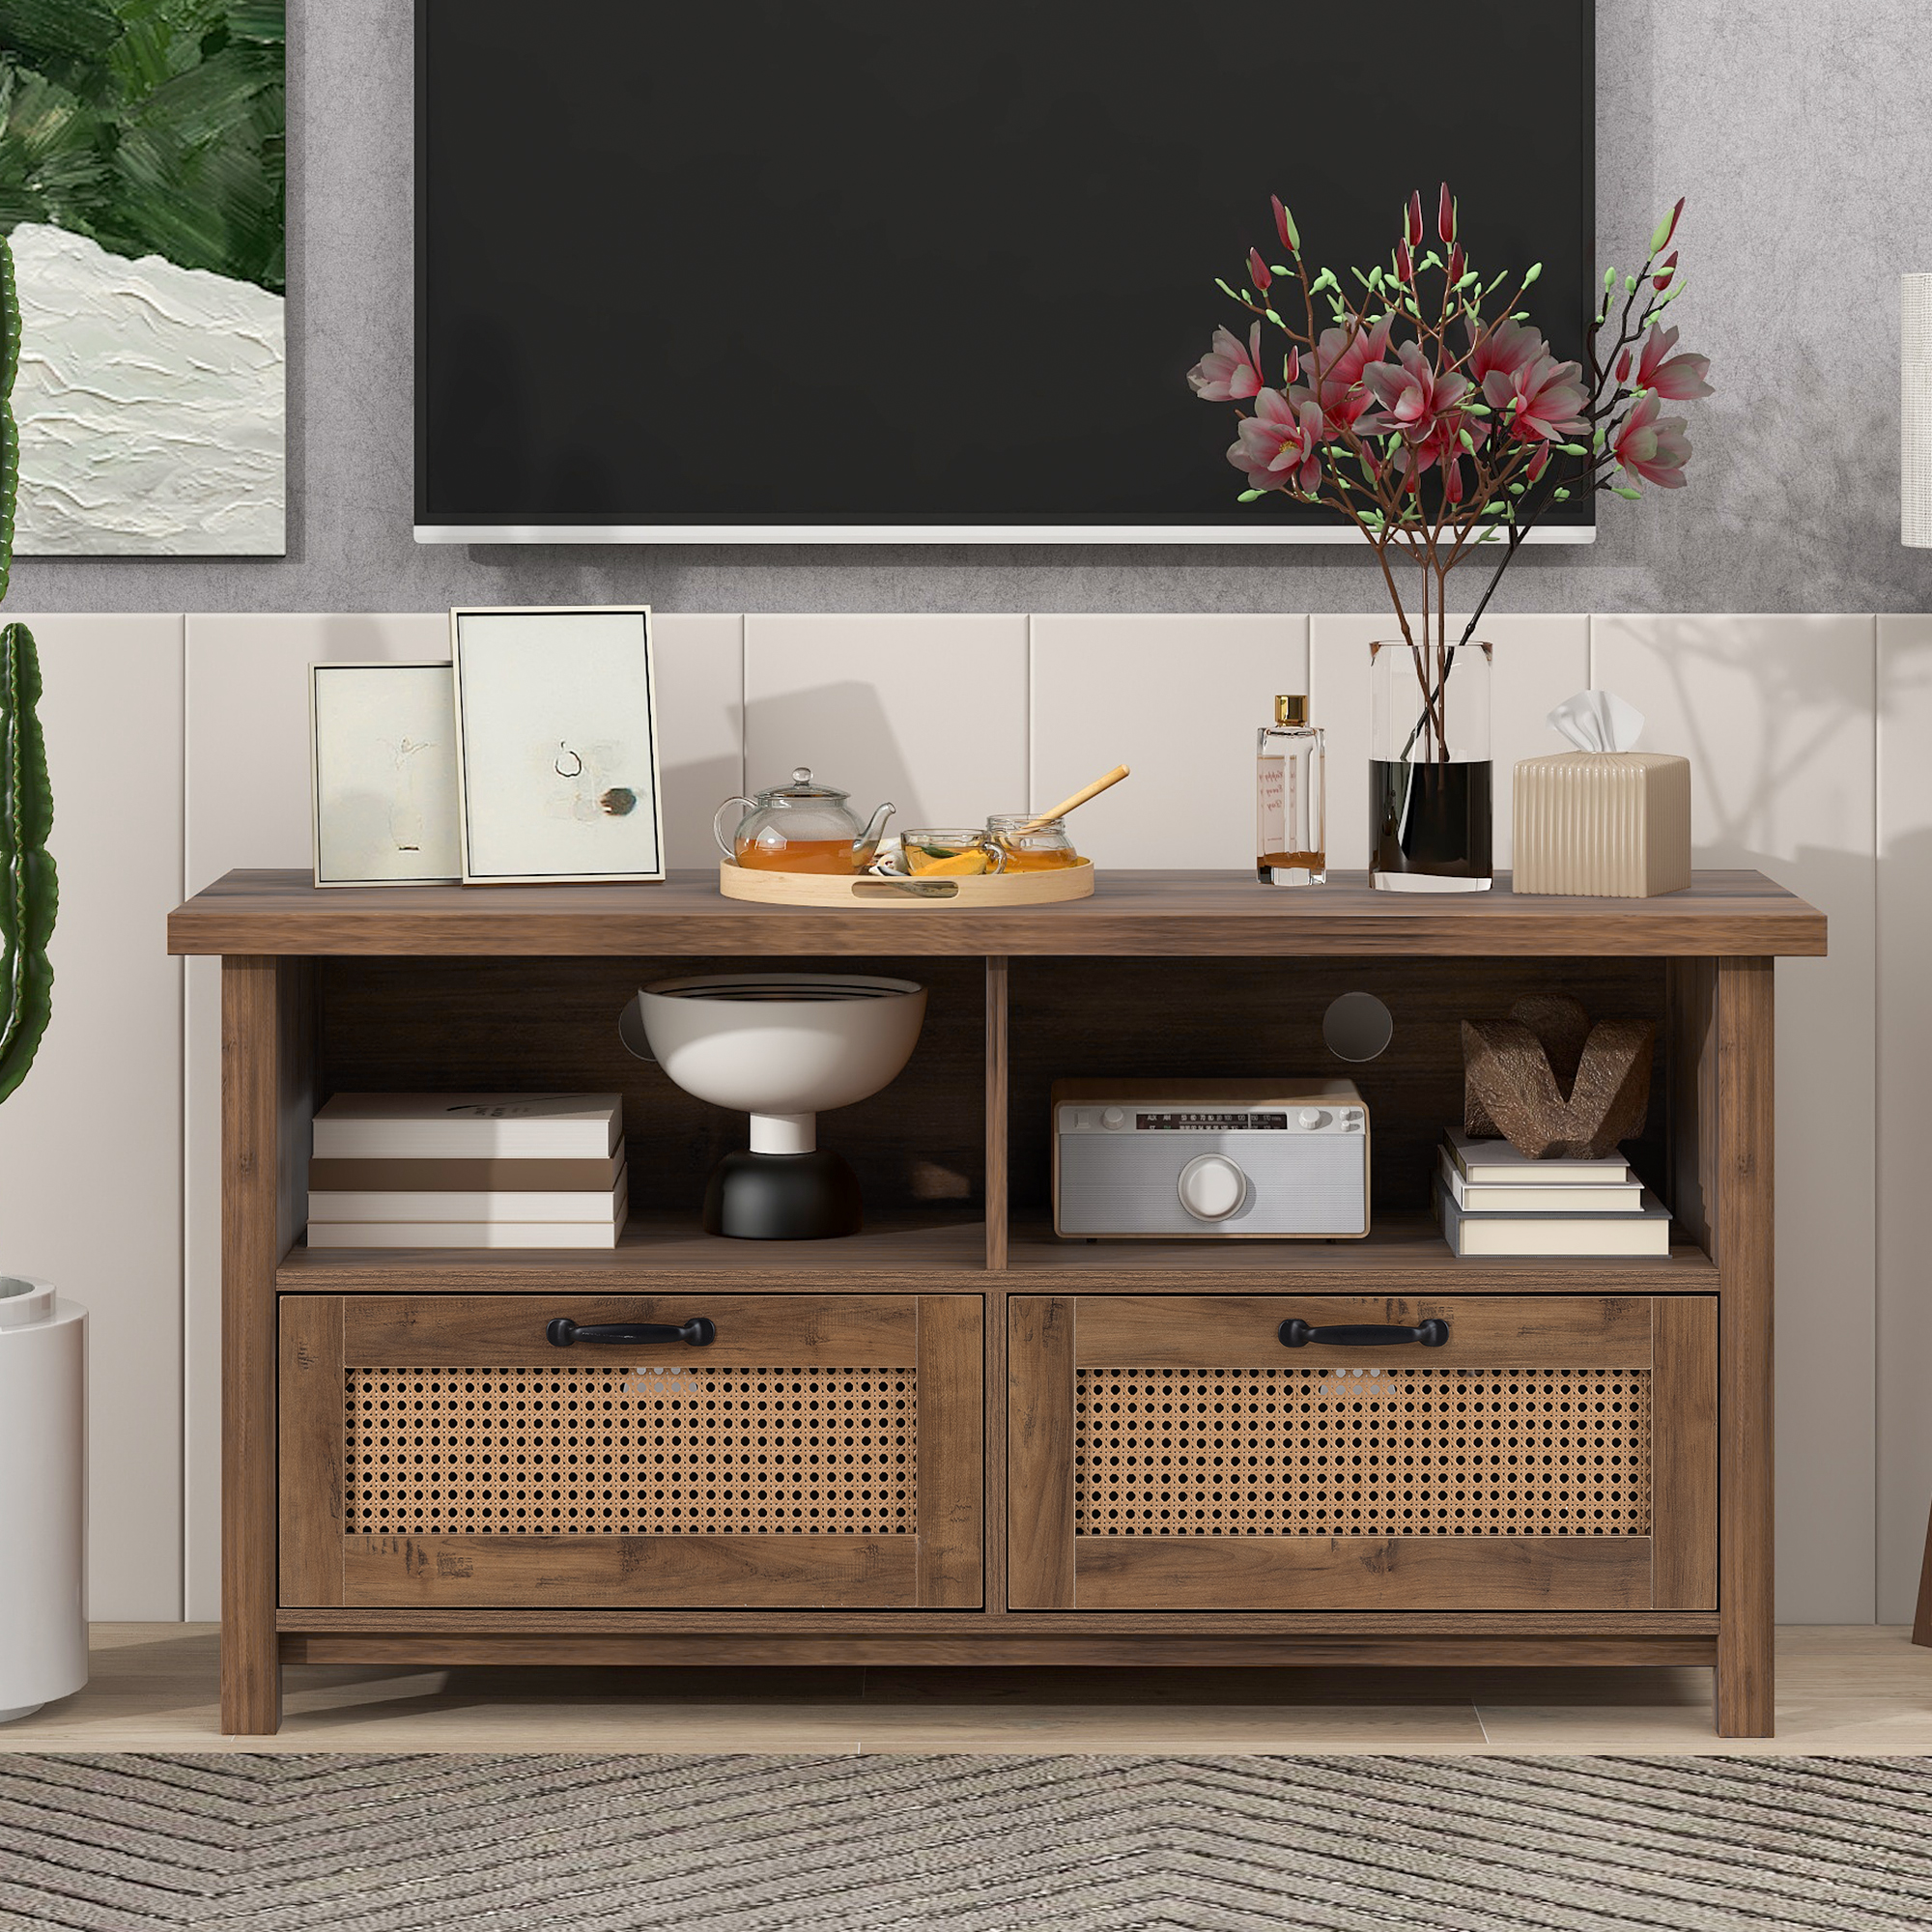 TV Stand,Two doors of TV cabinet, used for TV cabinet with a maximum size of 55 inches, rattan cabinet door, slide rail design, modern TV cabinet, yellow-Boyel Living